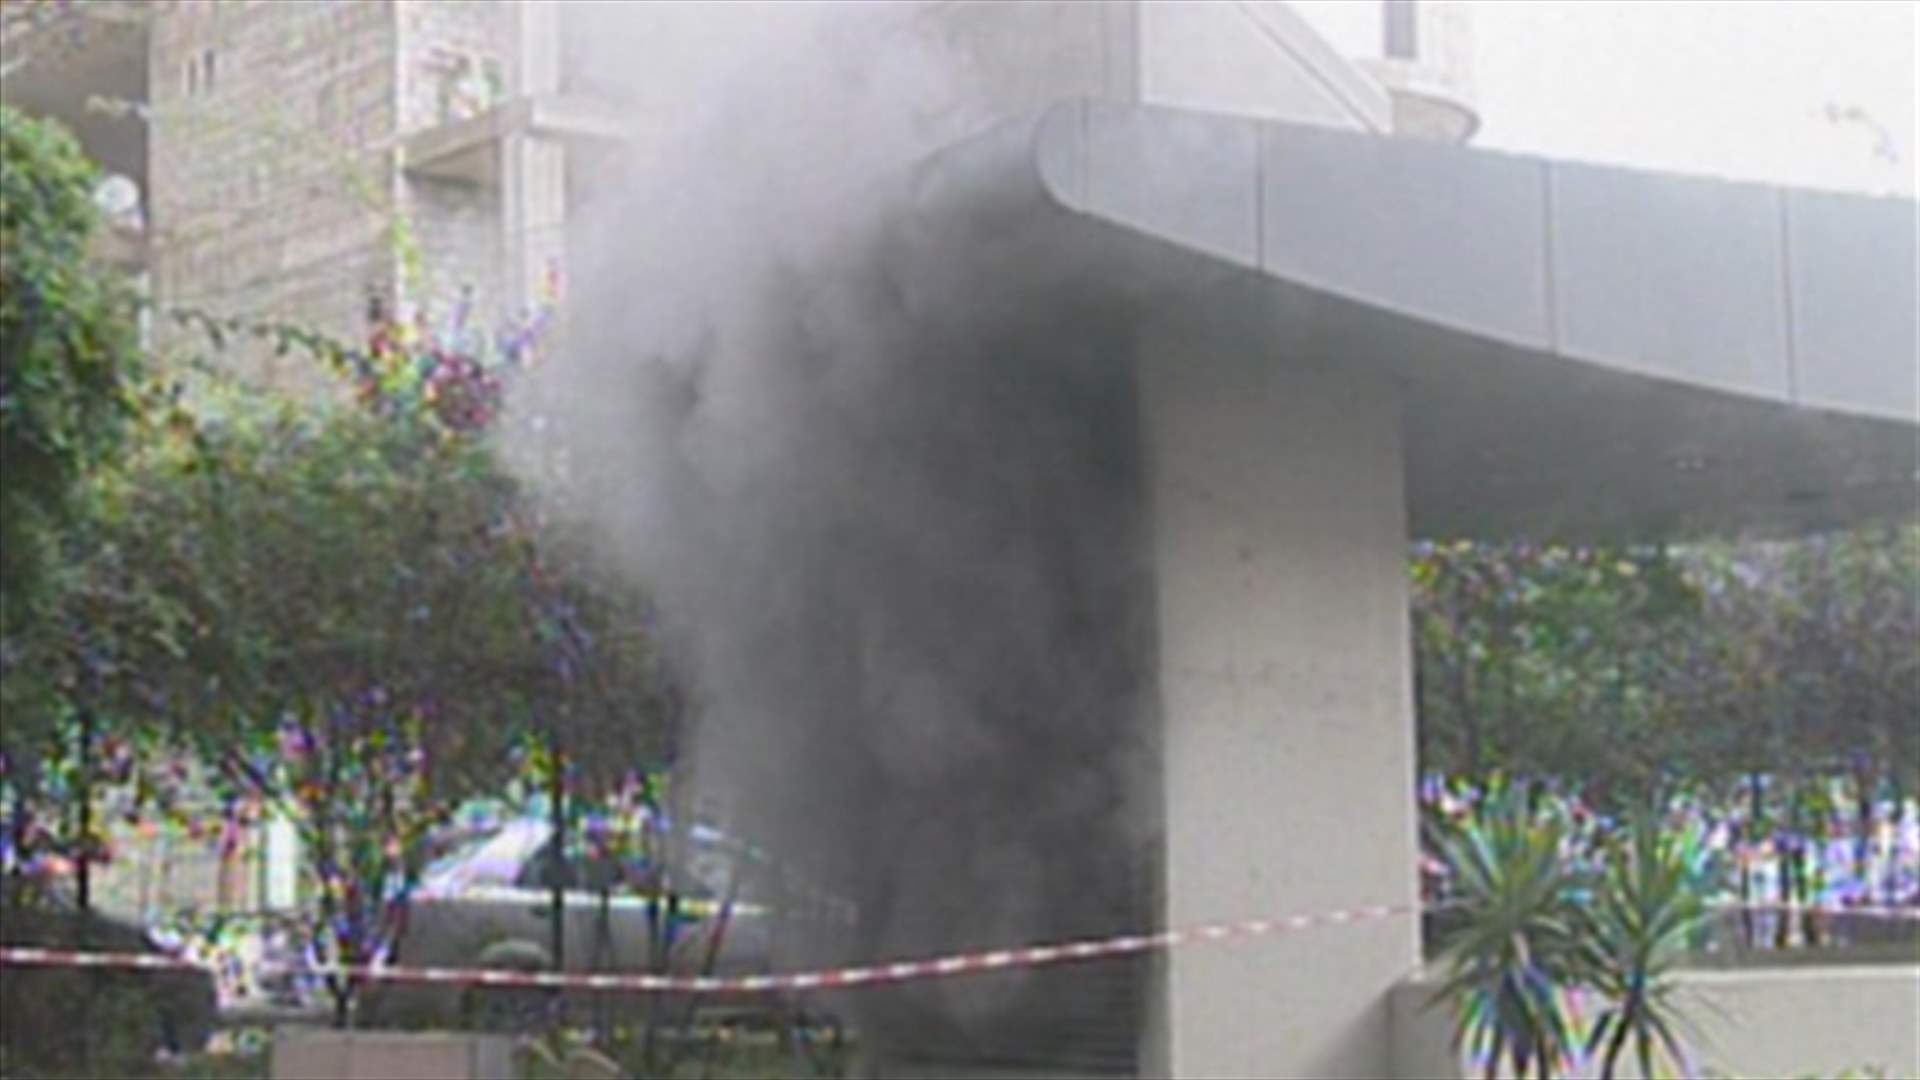 Fire erupts again at Beirut Mall